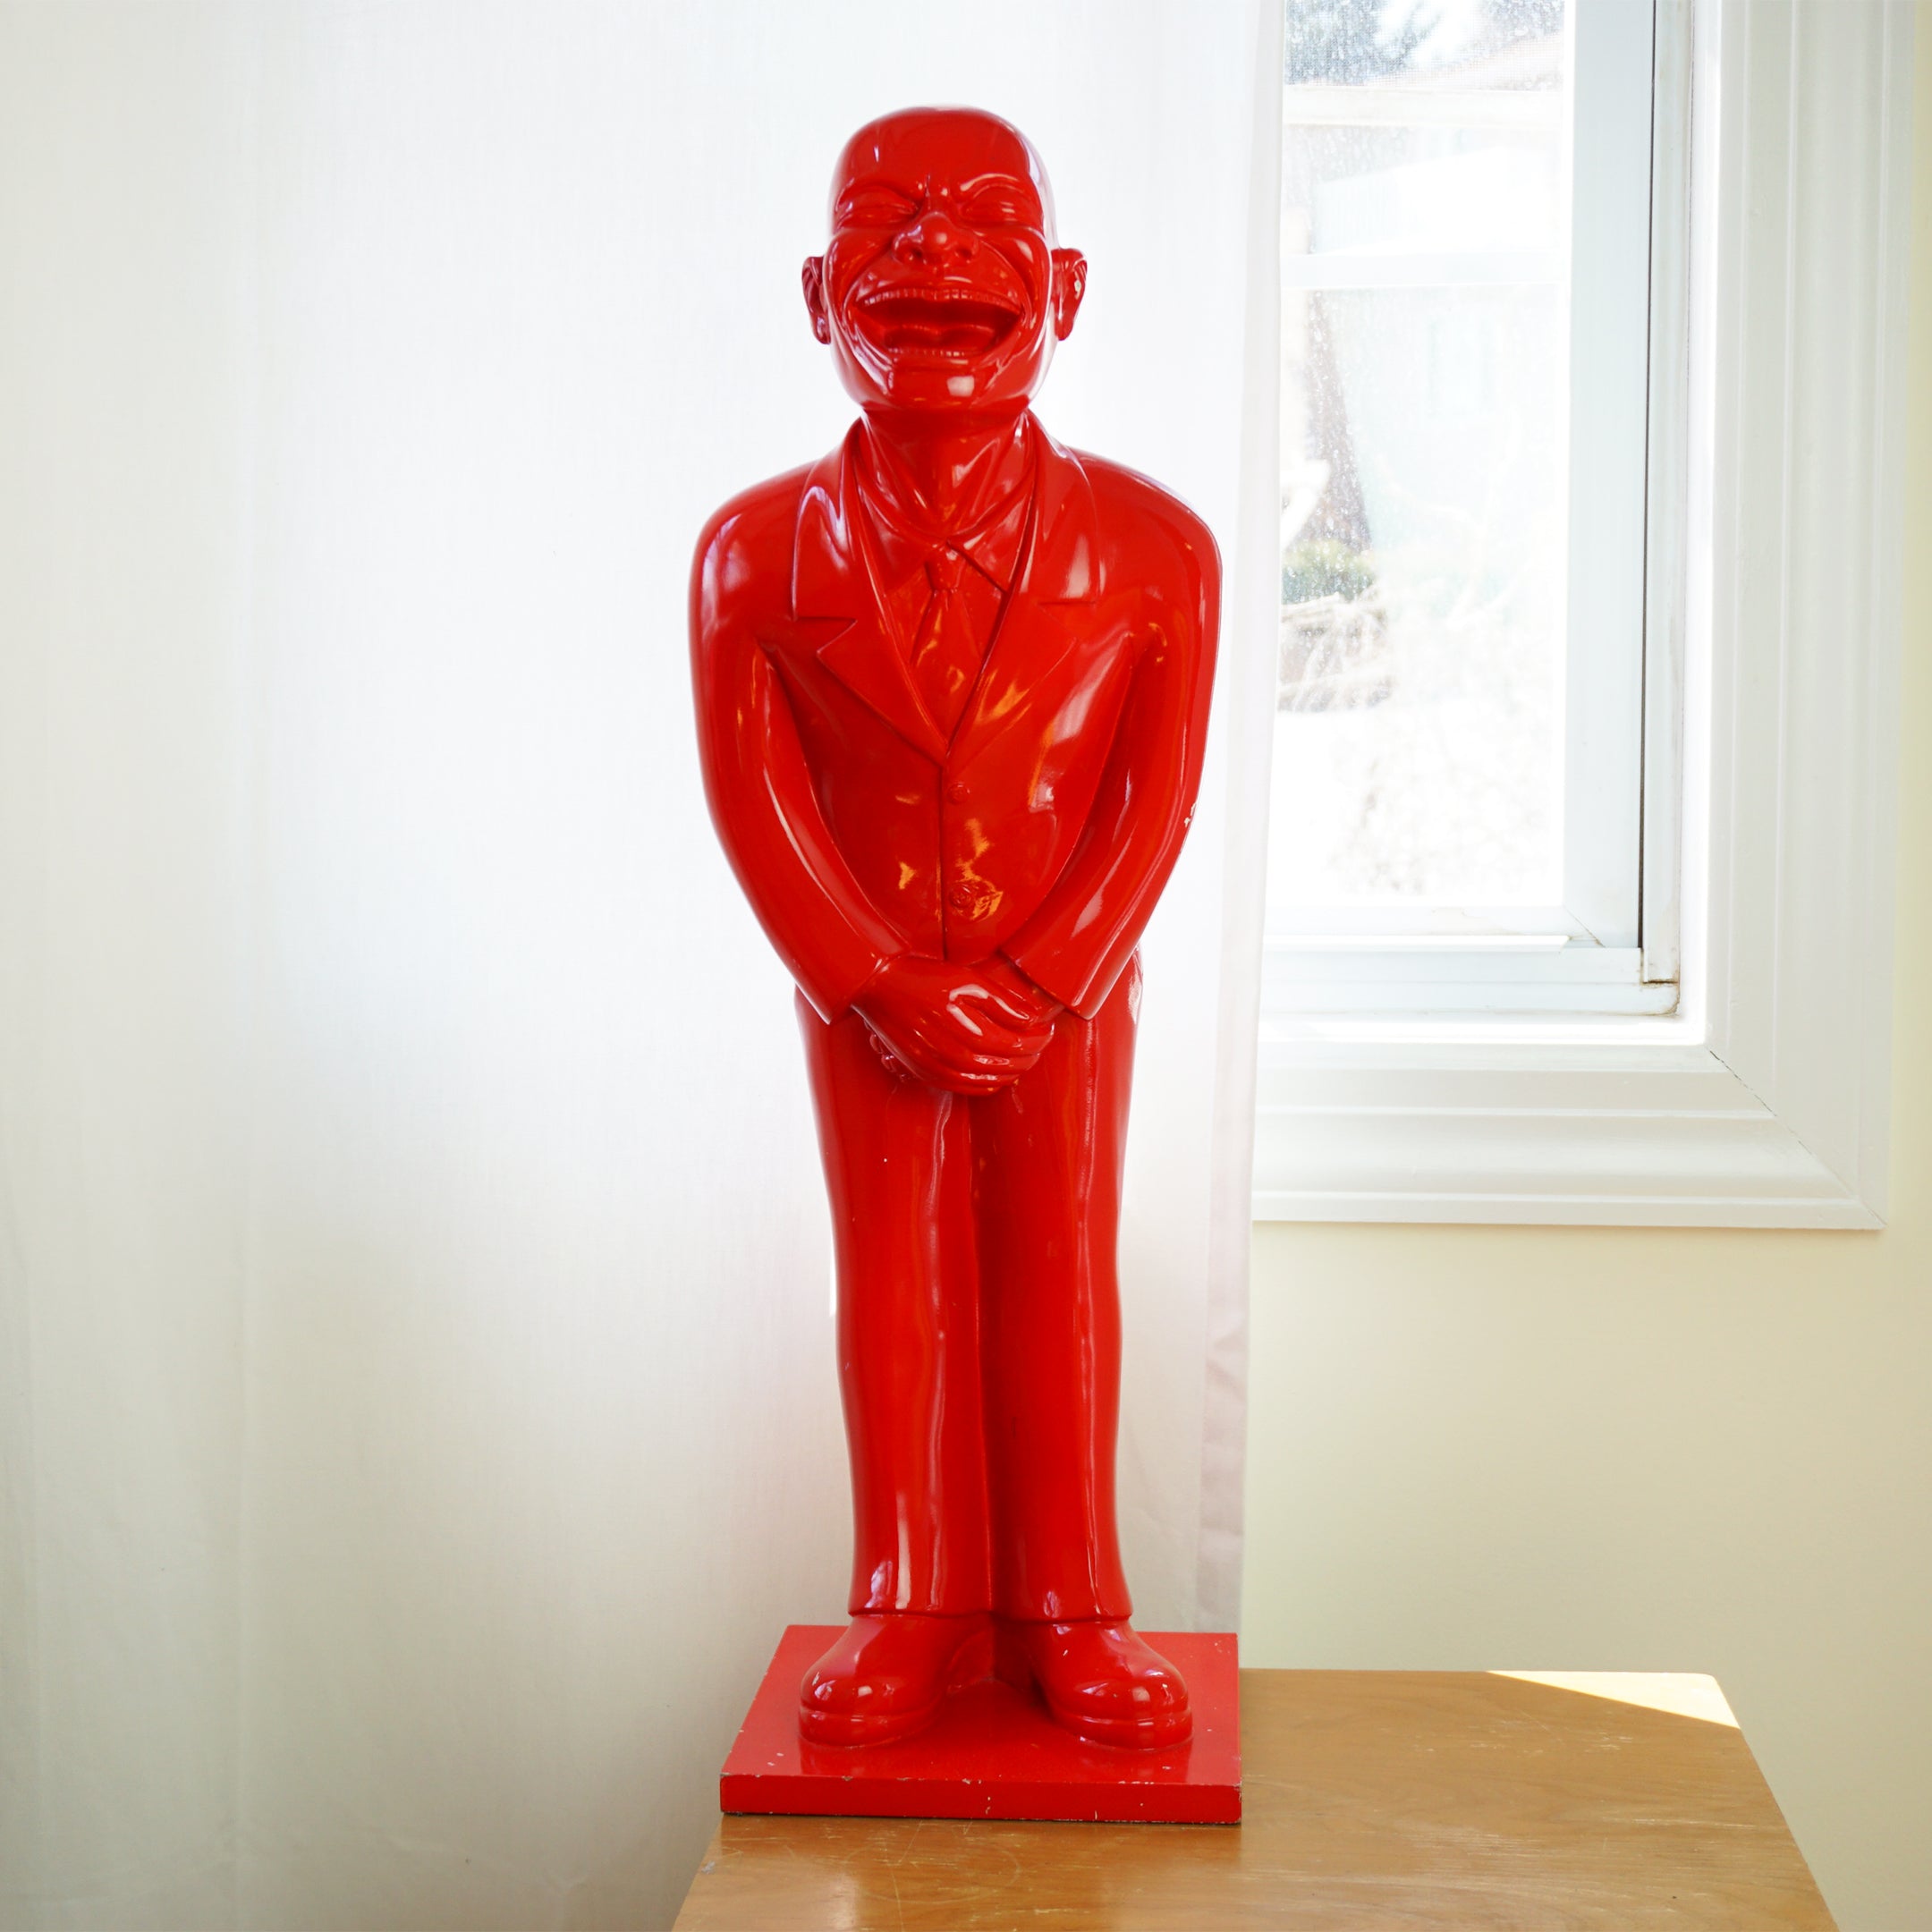 Vintage 26" Statue of Butler in Monochrome Red Resin wearing Suit and Tie